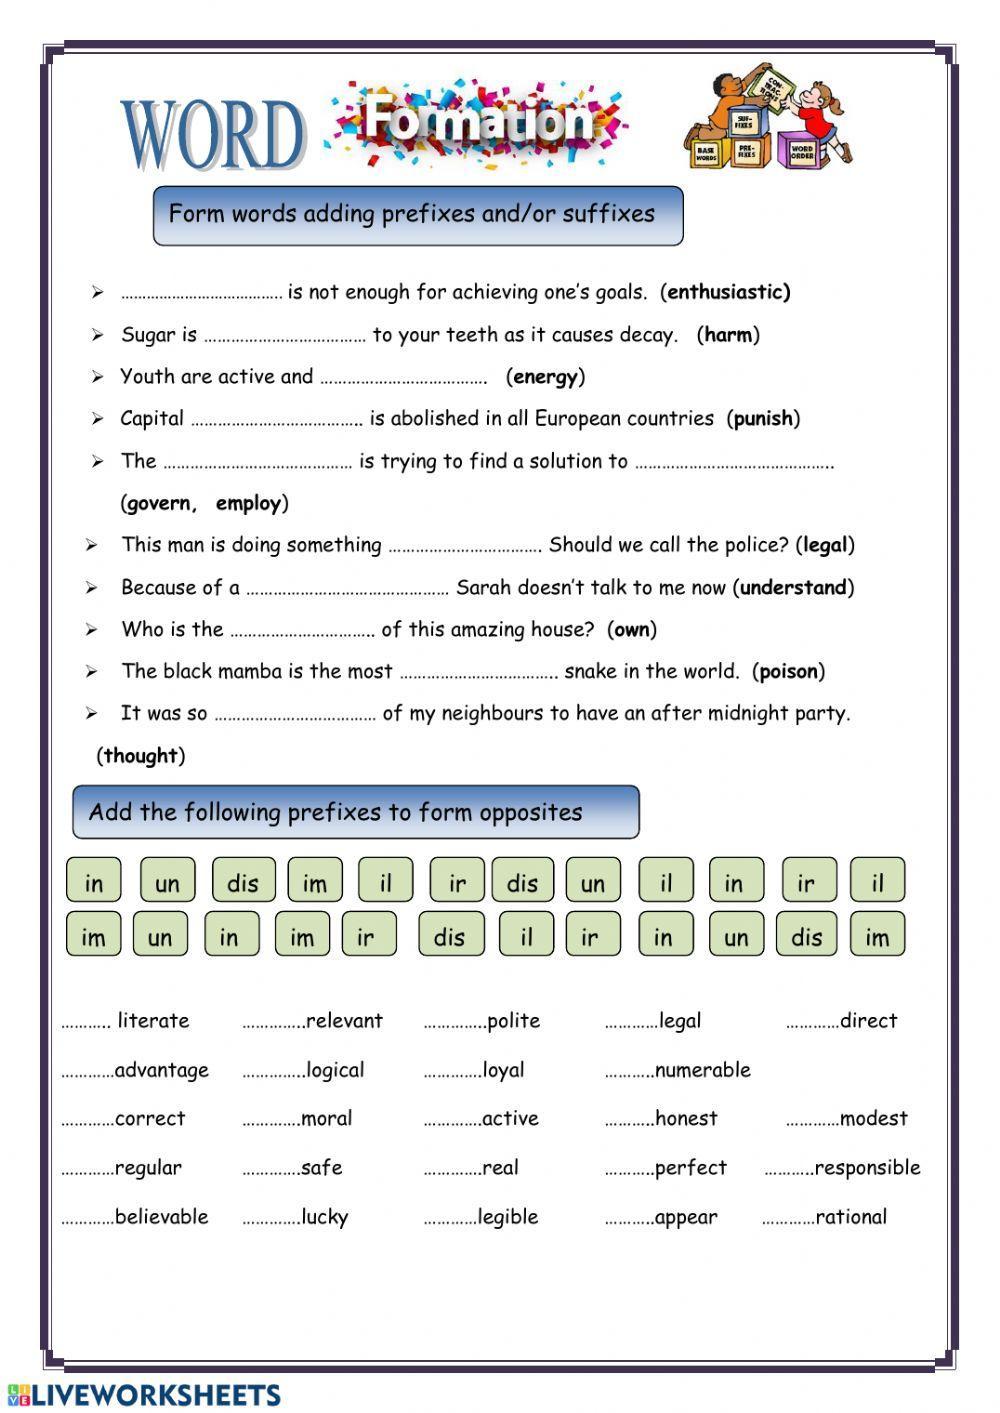 Word formation (Prefixes-Suffixes)